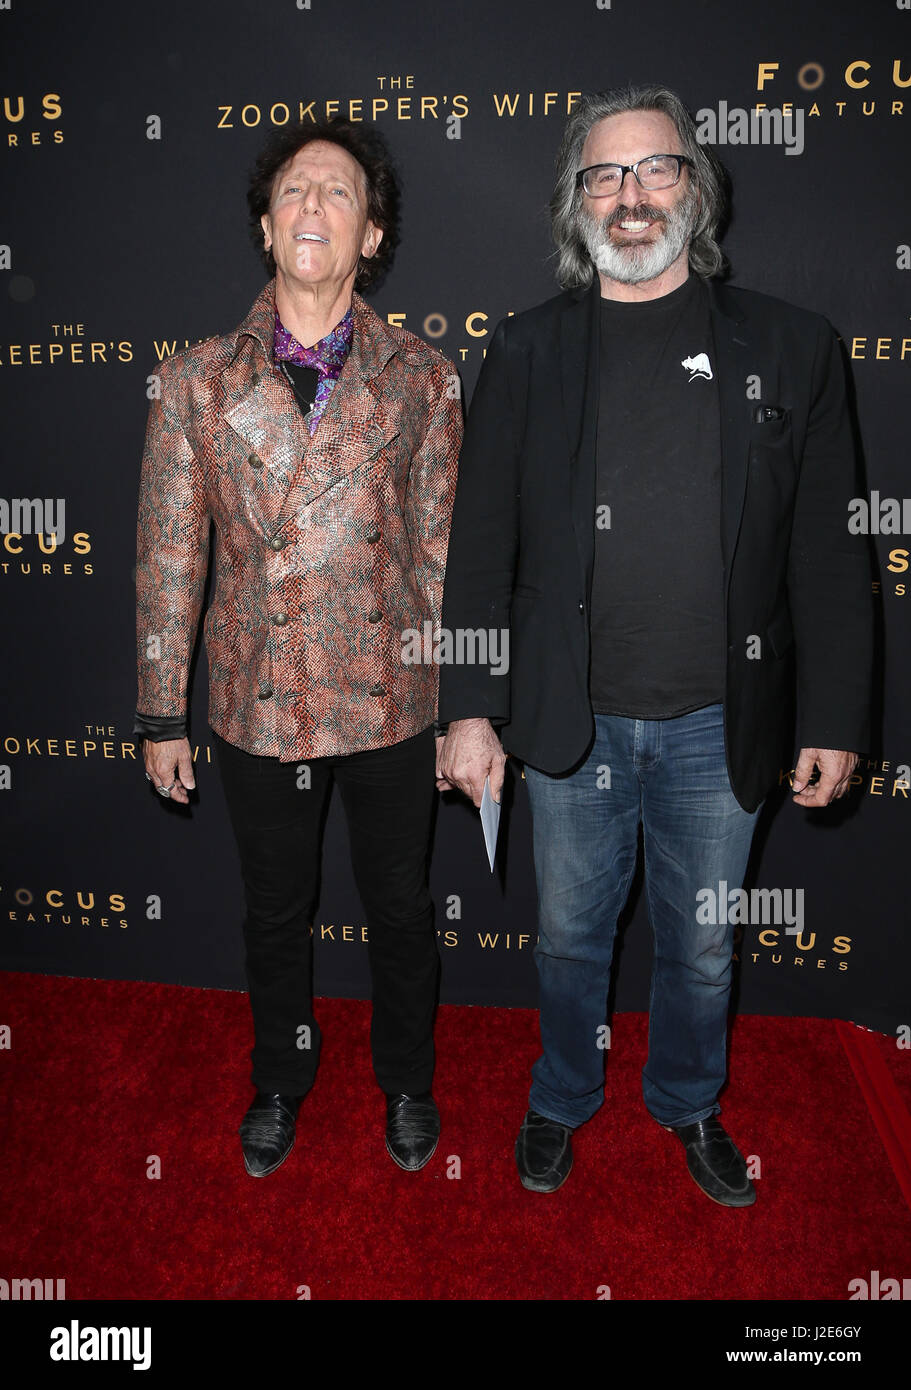 Premiere Of Focus Features' 'The Zookeeper's Wife' Featuring: Robert Carradine, Guest Where: Hollywood, California, United States When: 28 Mar 2017 Stock Photo